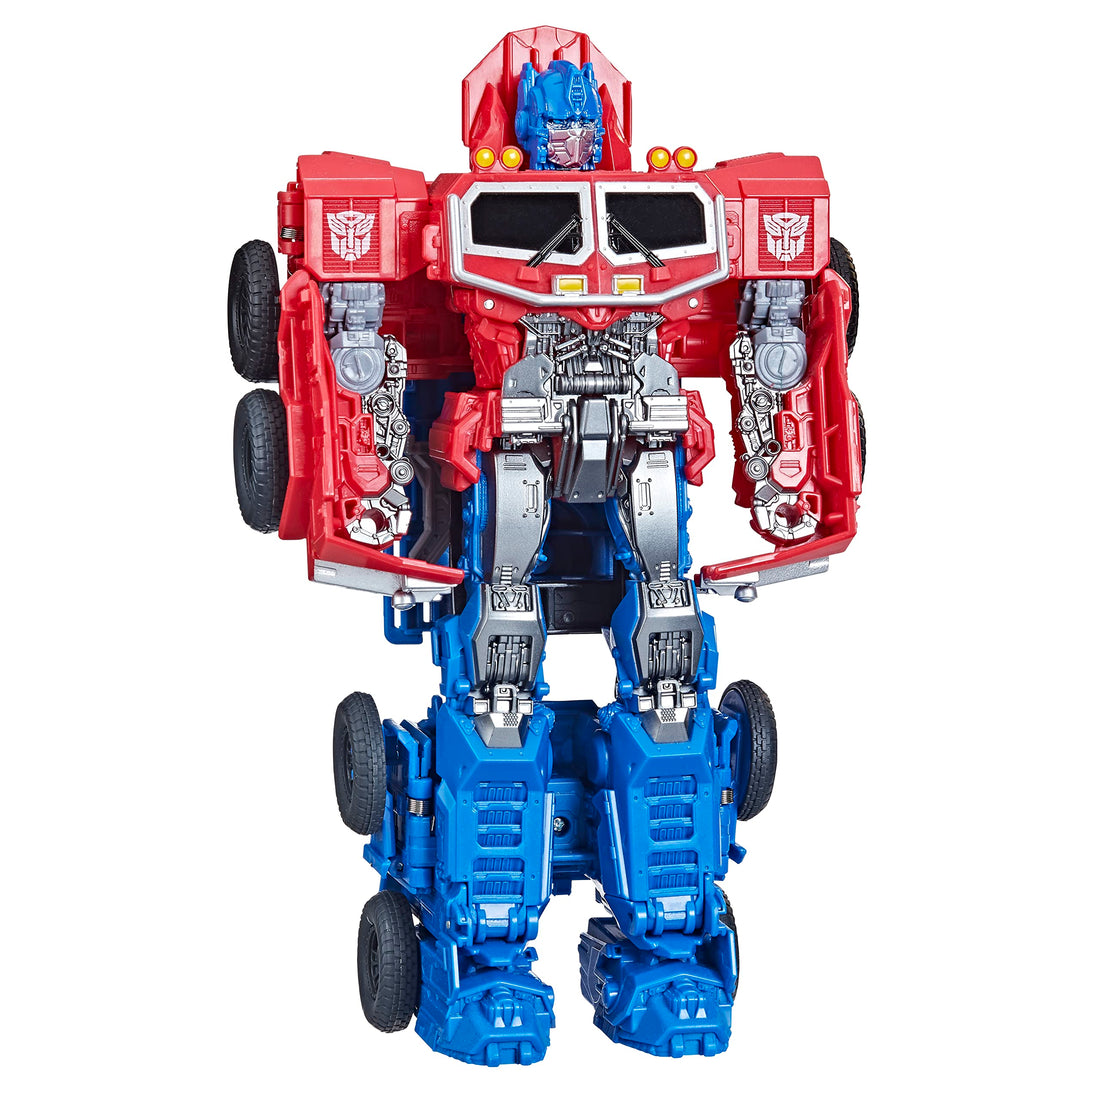 TRANSFORMERS Toys Rise of the Beasts Film, Smash Changer Optimus Prime Action Figure – Ages 6 and up, 22.5 cm